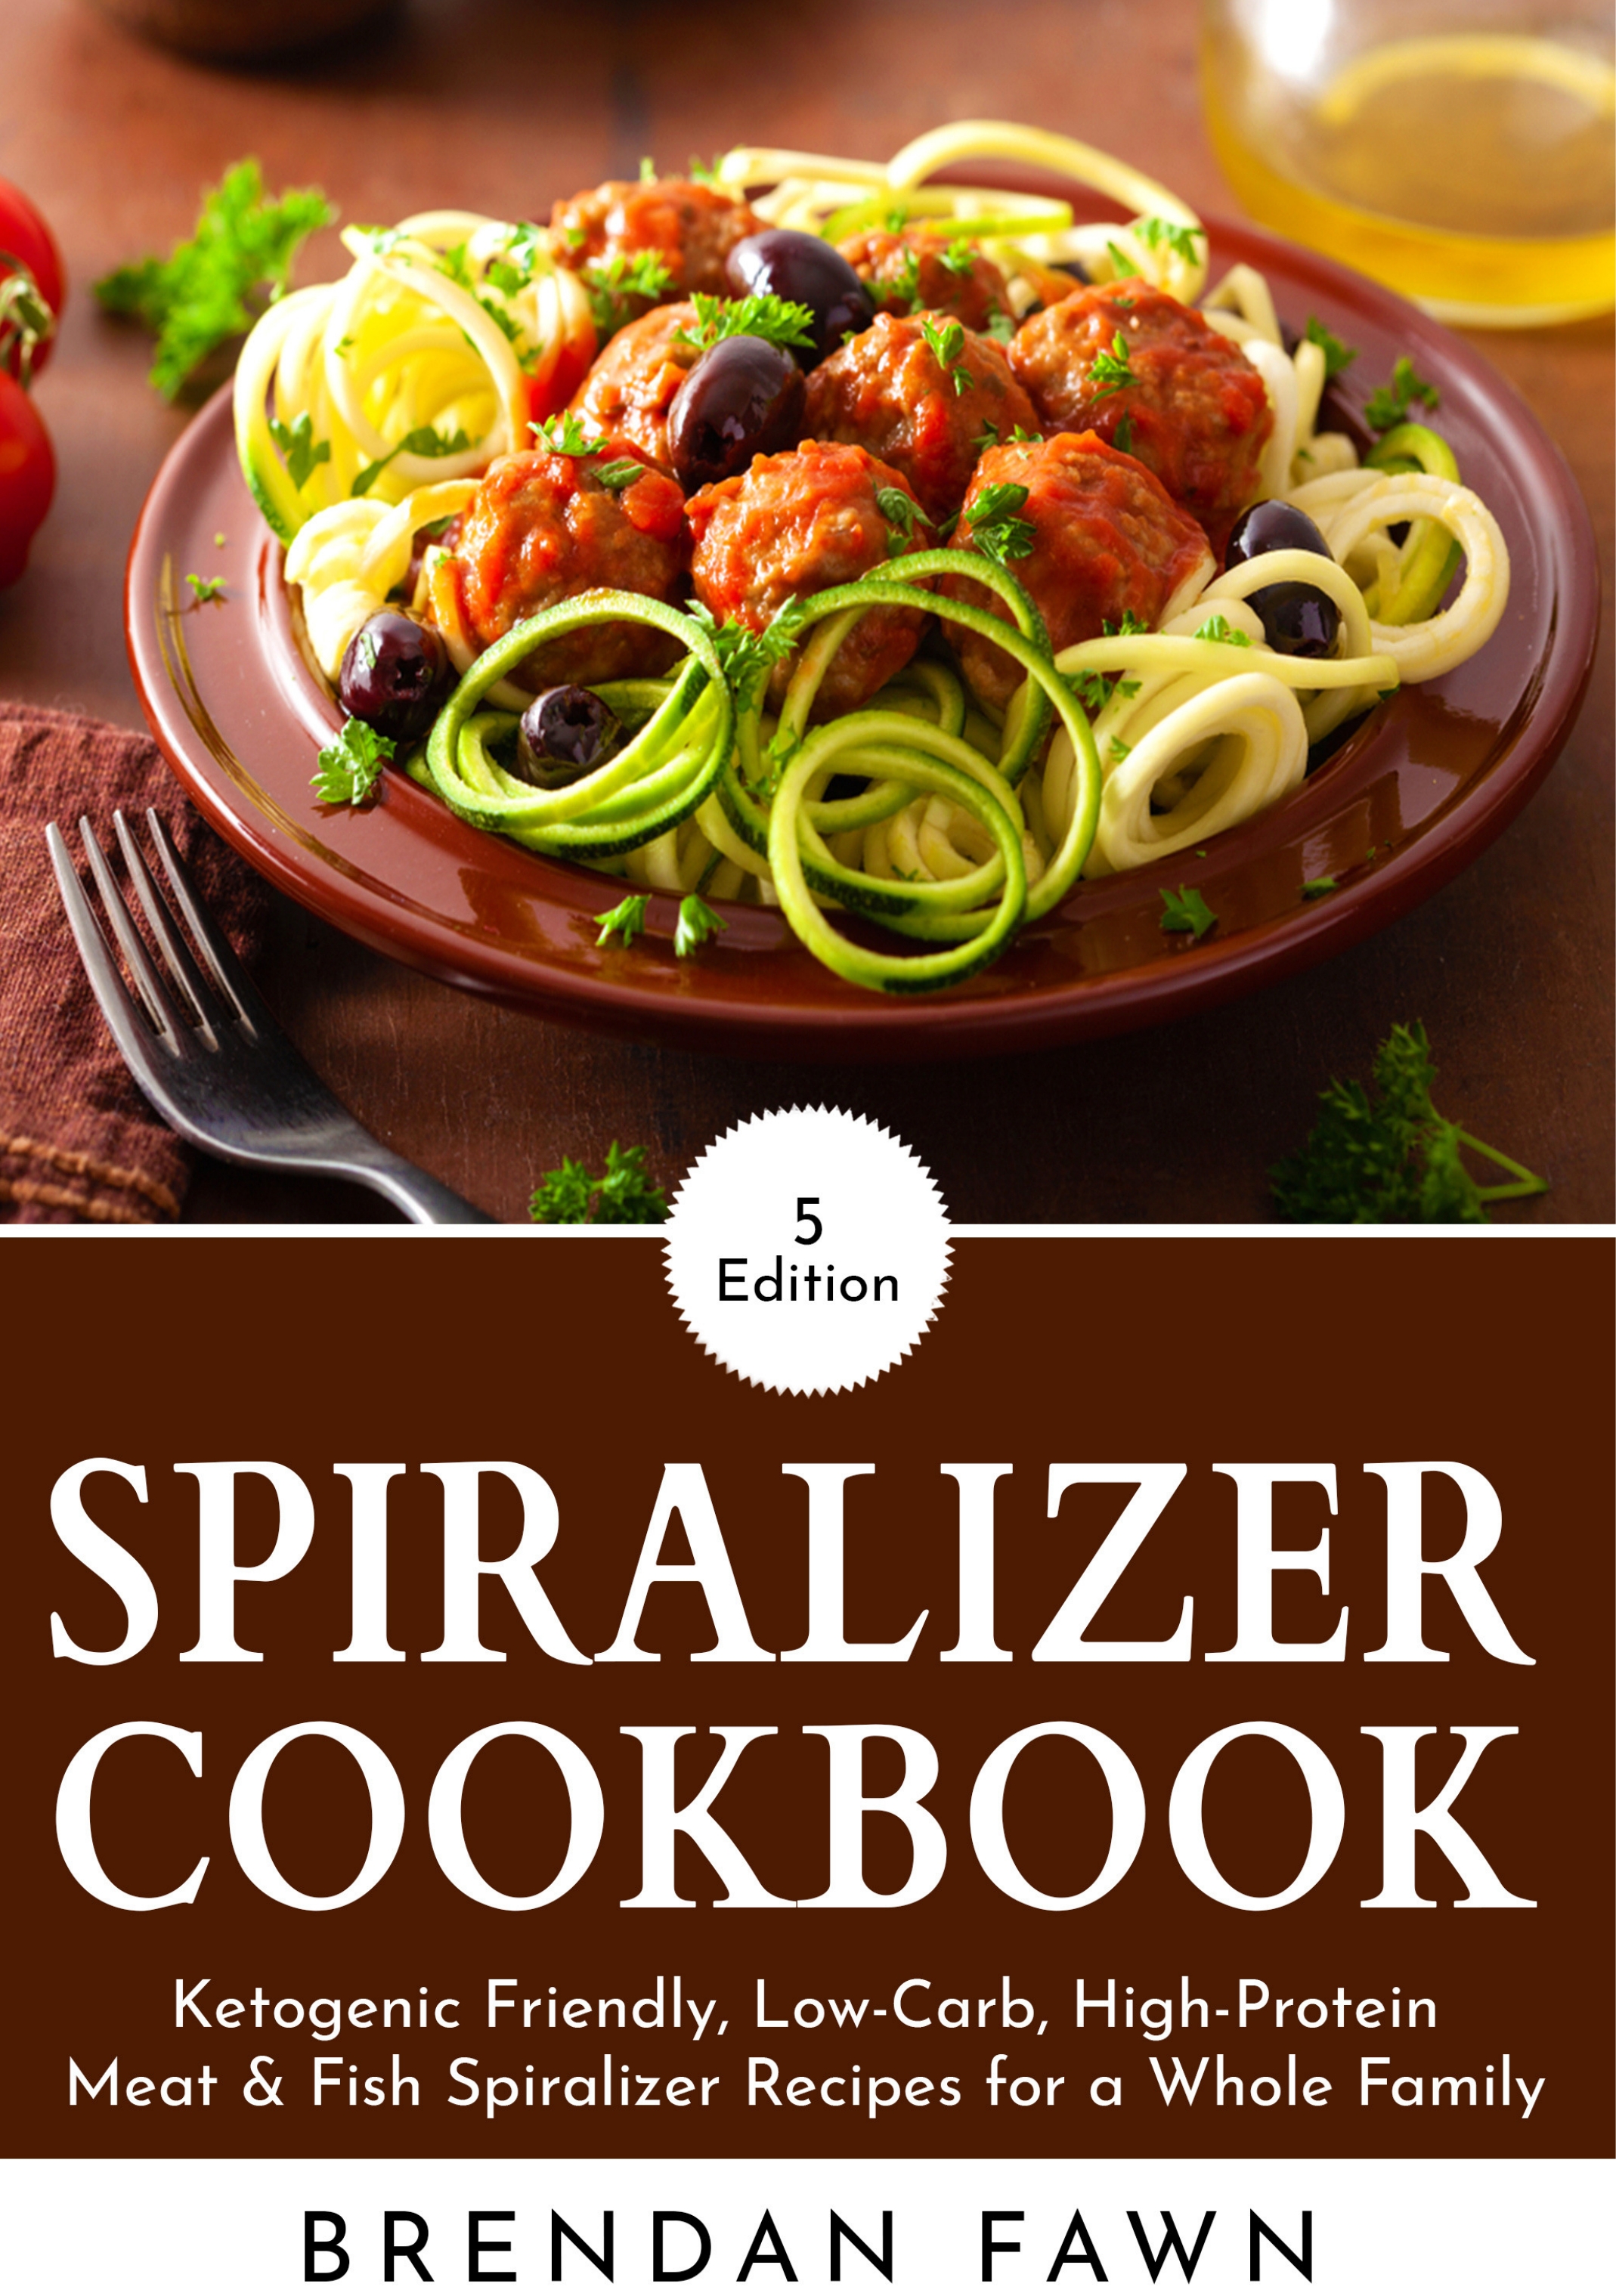 FREE: Spiralizer Cookbook: Ketogenic Friendly, Low-Carb, High-Protein Meat & Fish Spiralizer Recipes for a Whole Family by Brendan Fawn